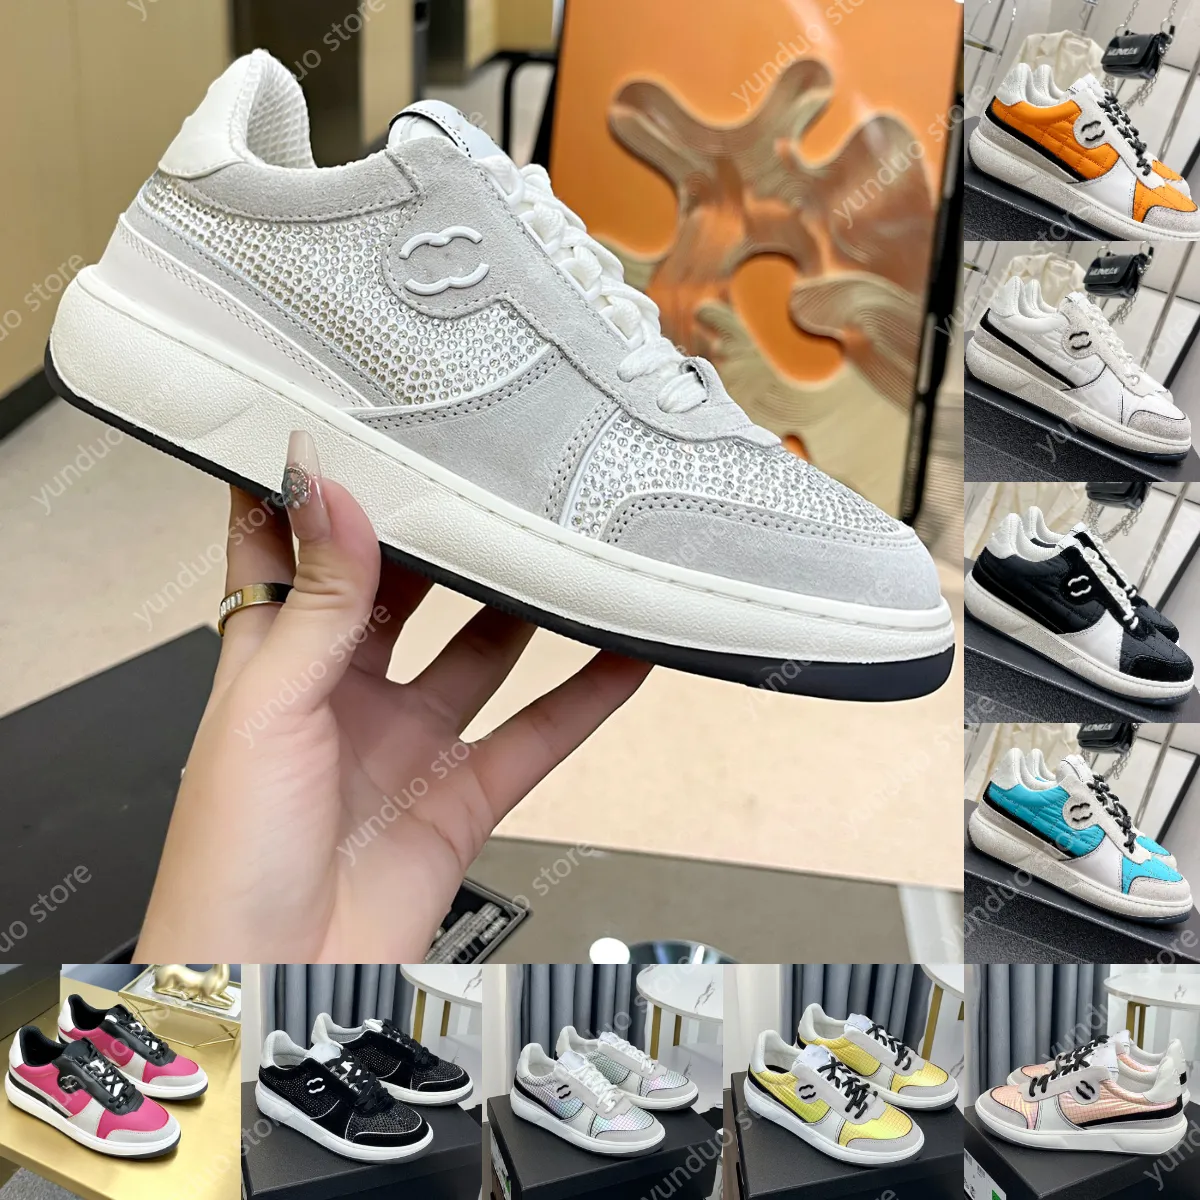 Designer Suede Calfskin shoes Women Lambskin Sneakers Fashion Sport Shoes Luxury Classic Mesh Trainers Casual Leather Running Shoe Workout Runner